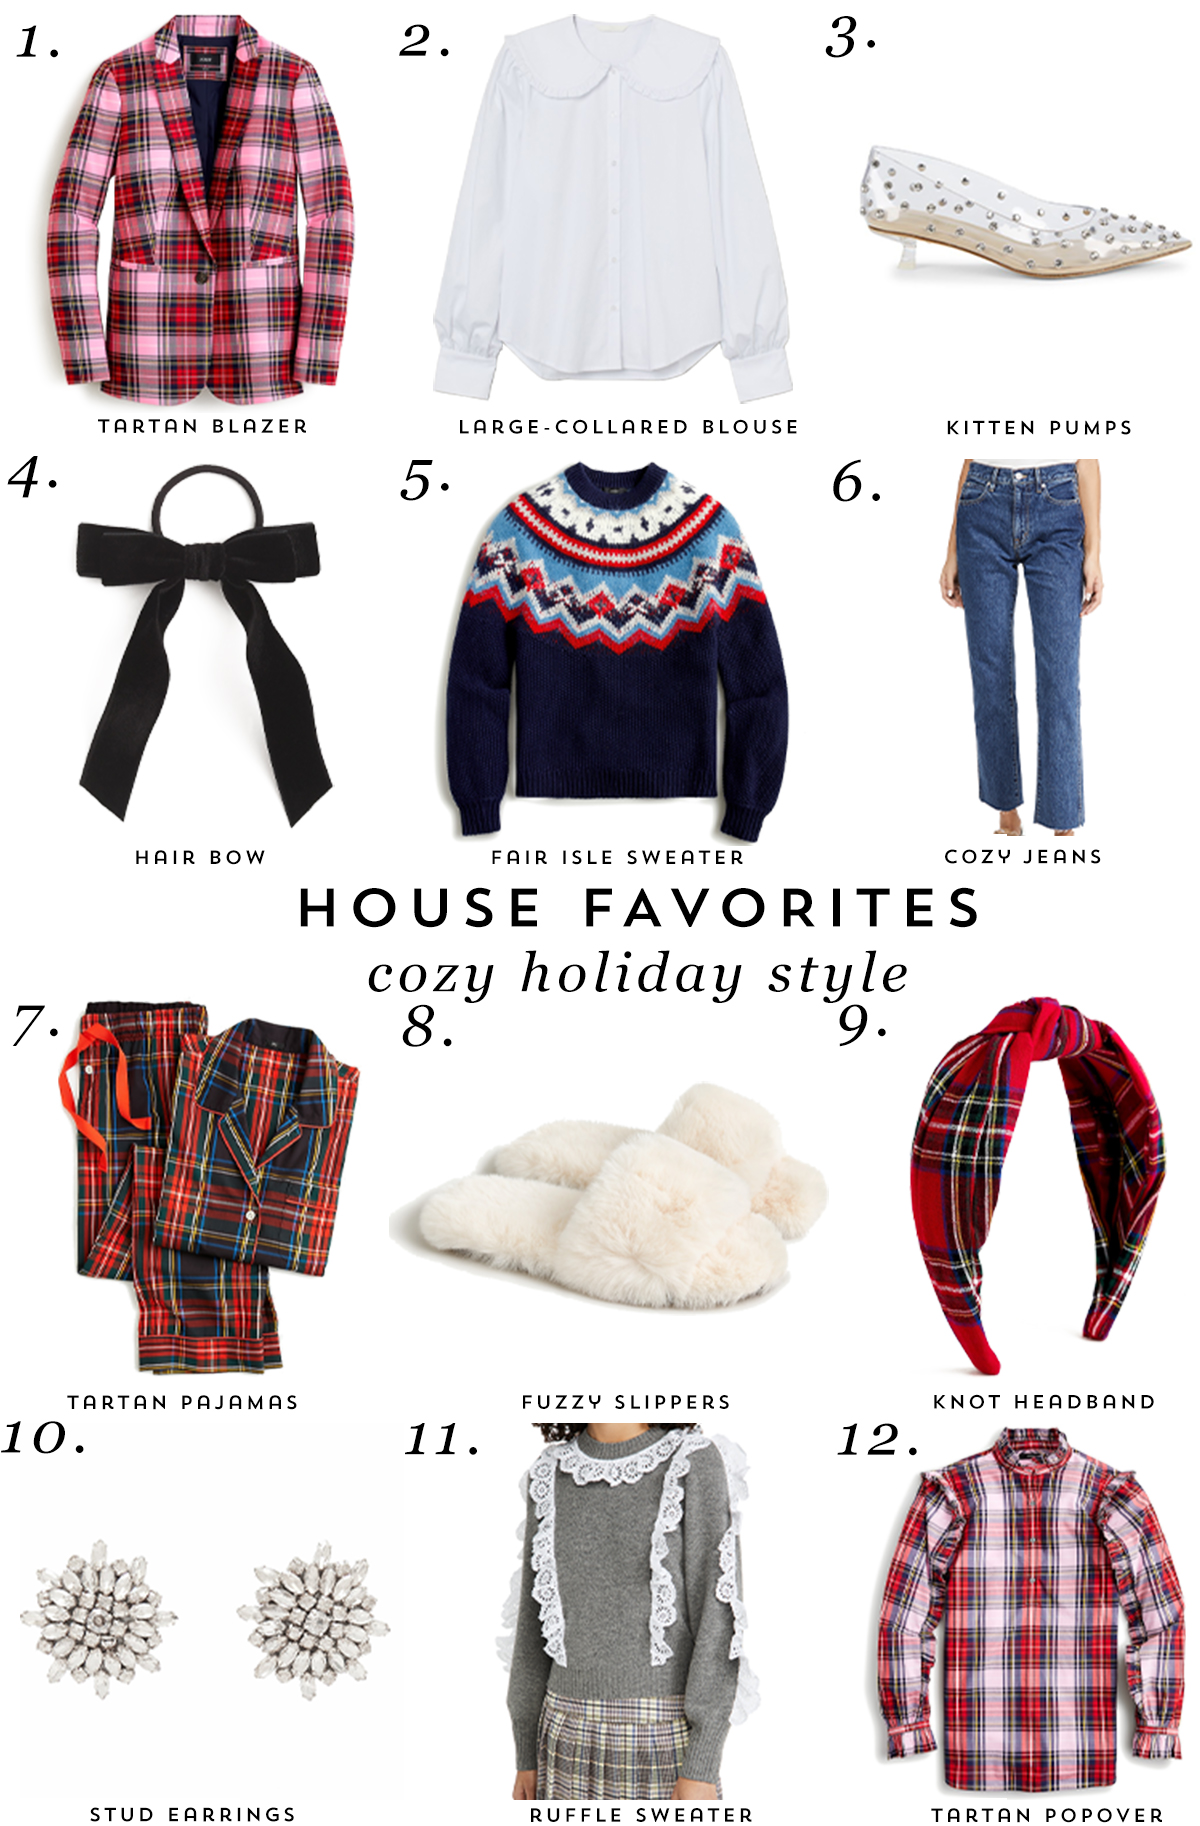 House Favorites: Cozy Holiday Style